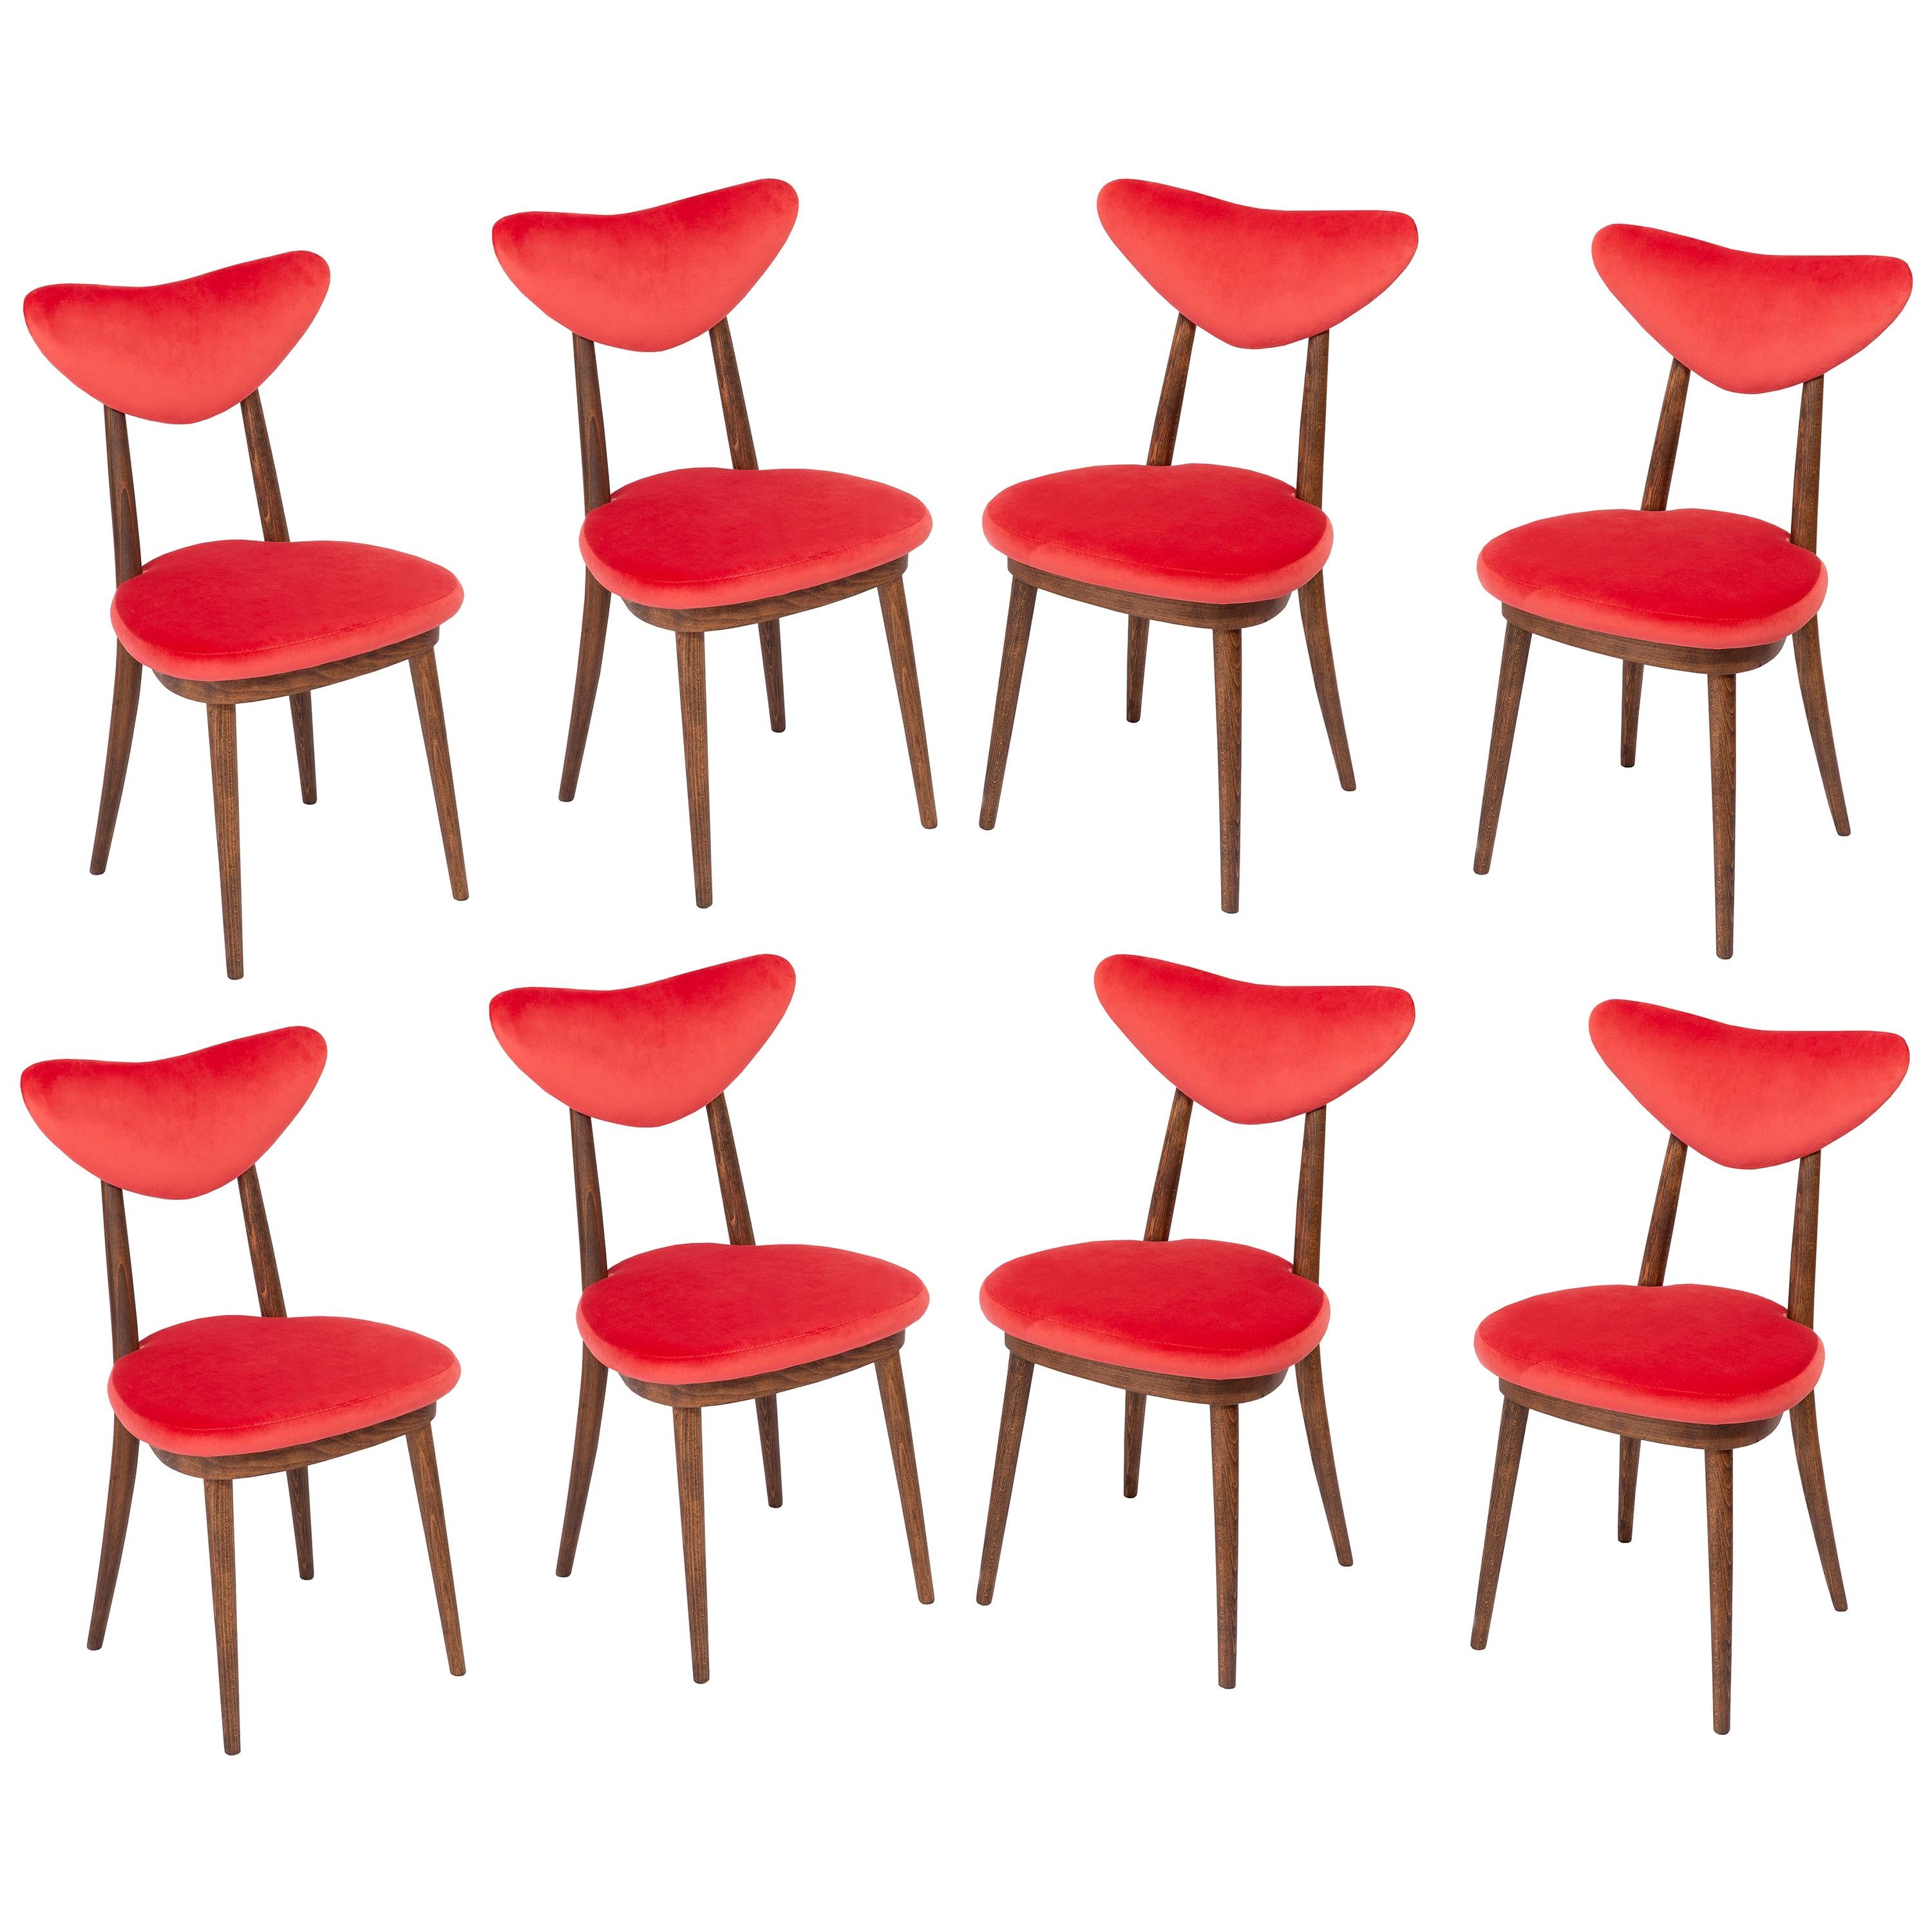 Set of Eight Red Heart Chairs, Poland, 1960s For Sale